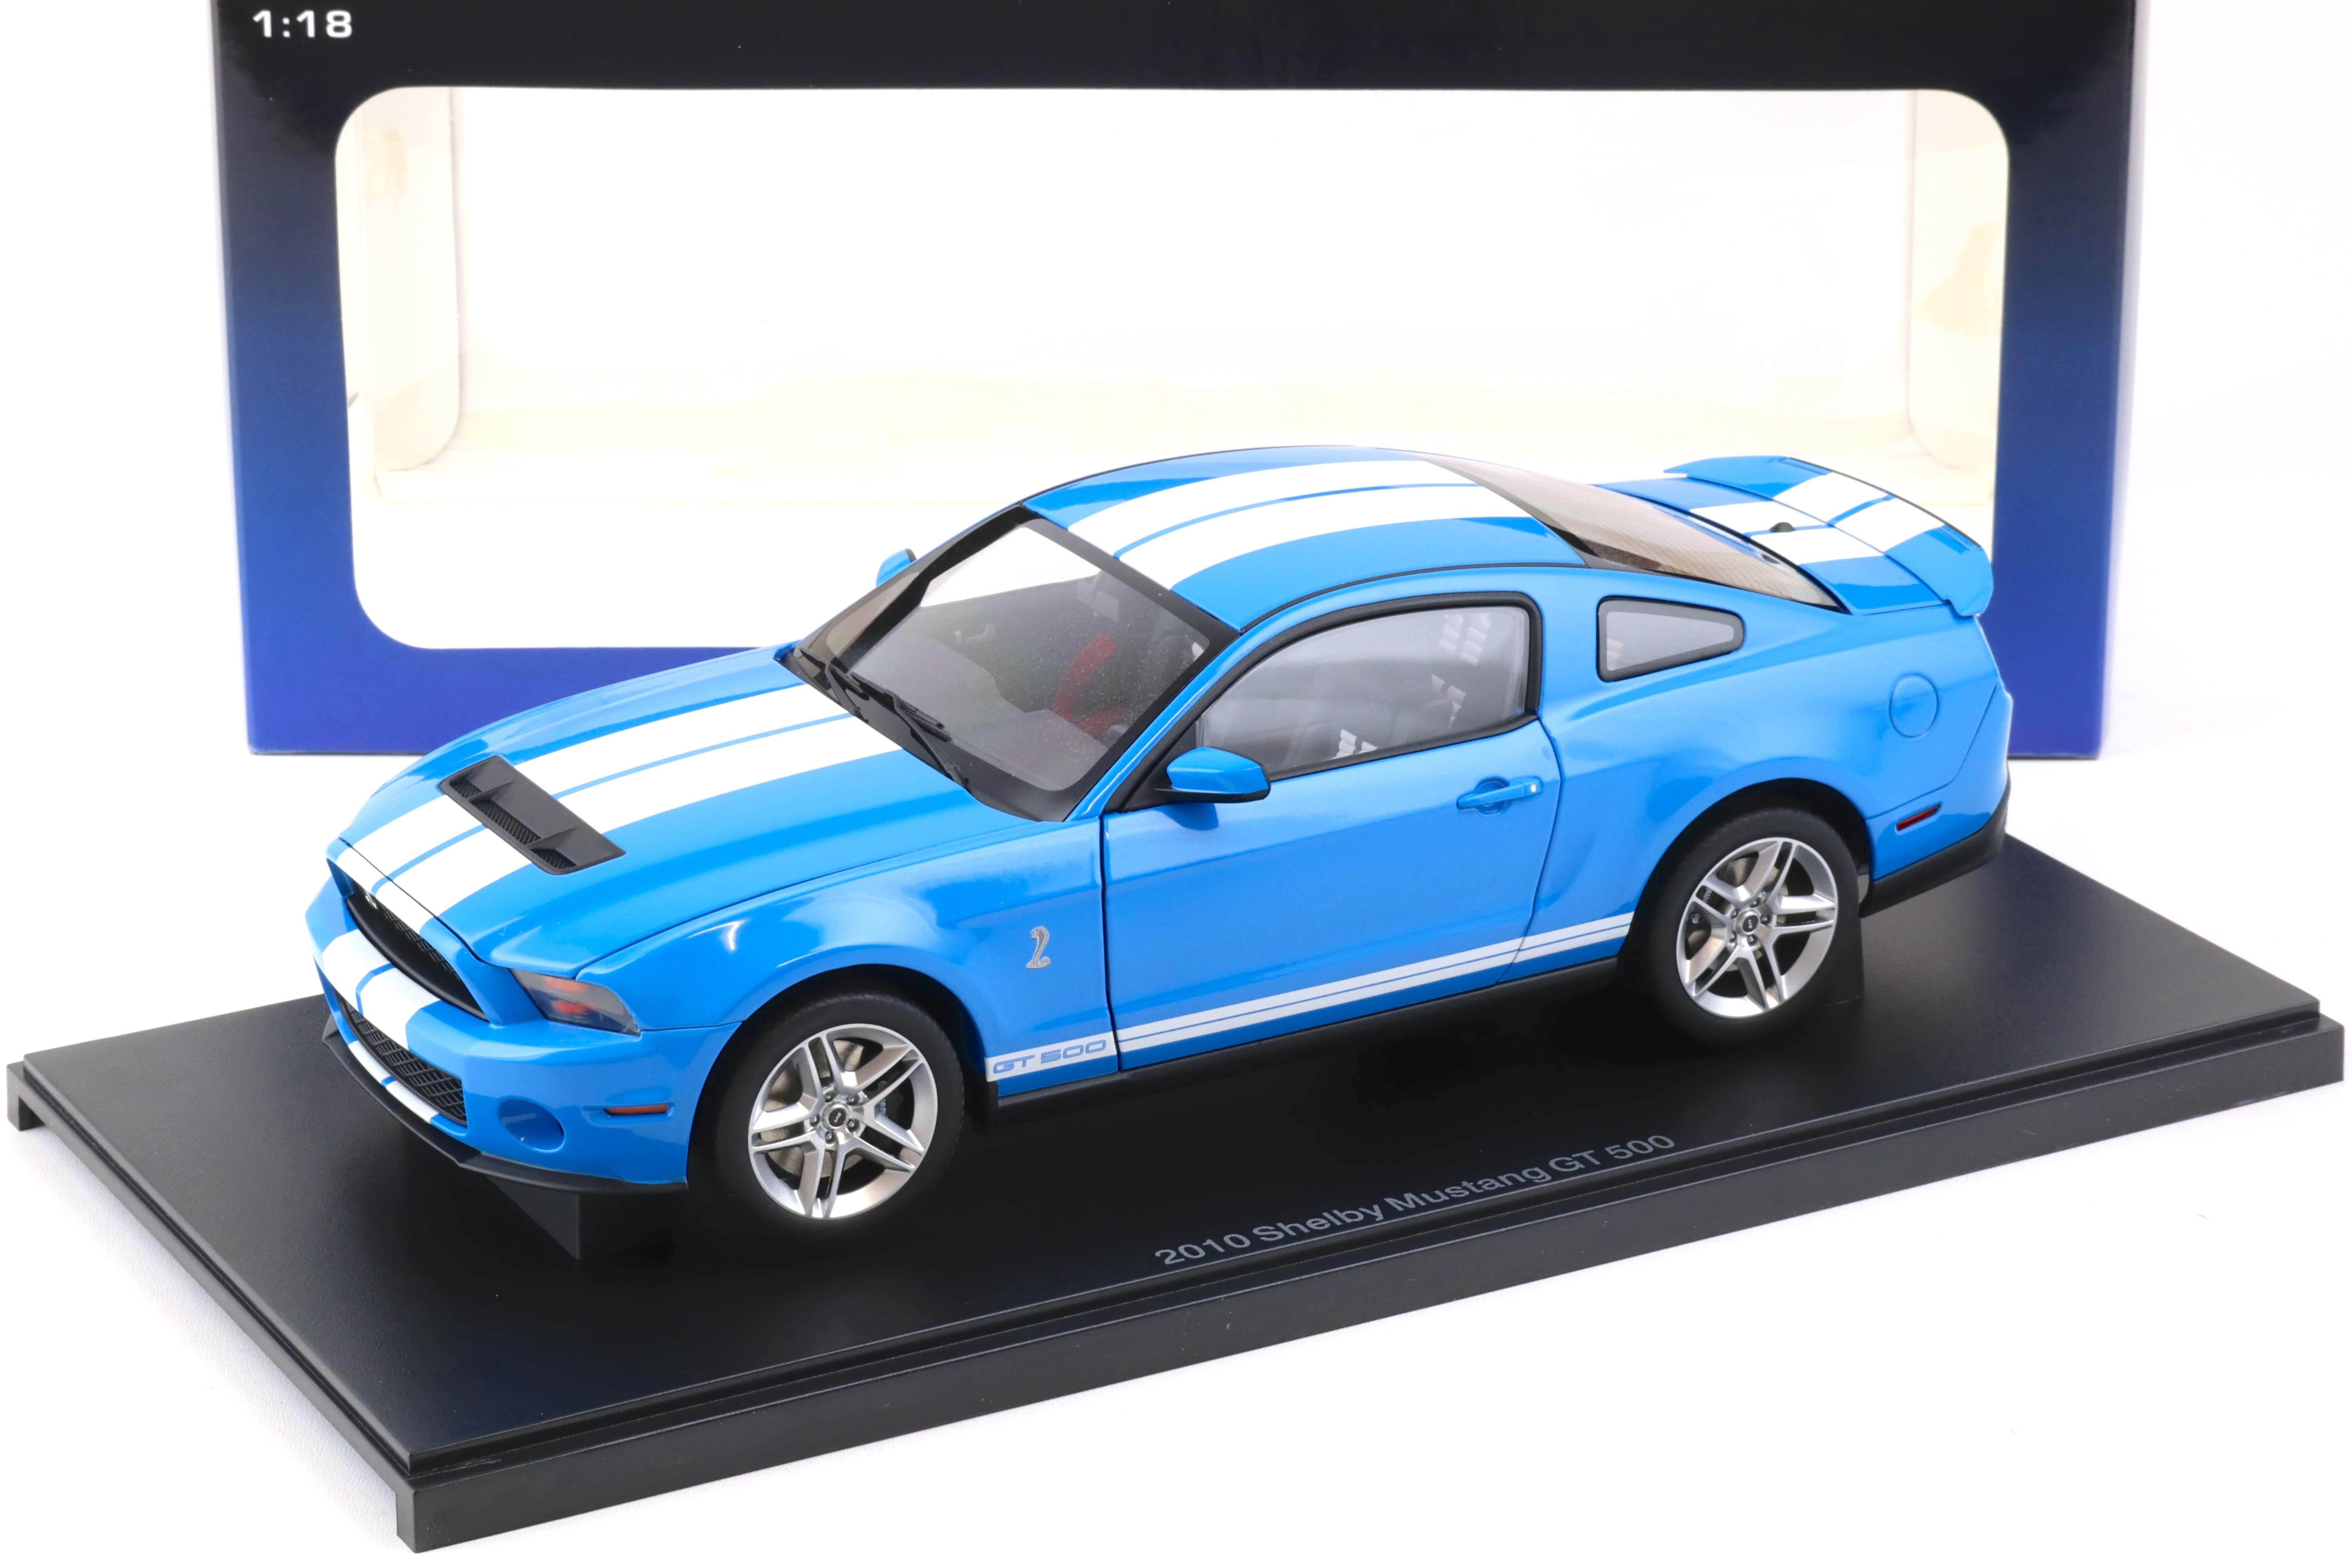 1:18 AUTOart 2010 Ford Shelby GT500 Coupe Grabber blue/ white stripes 72916